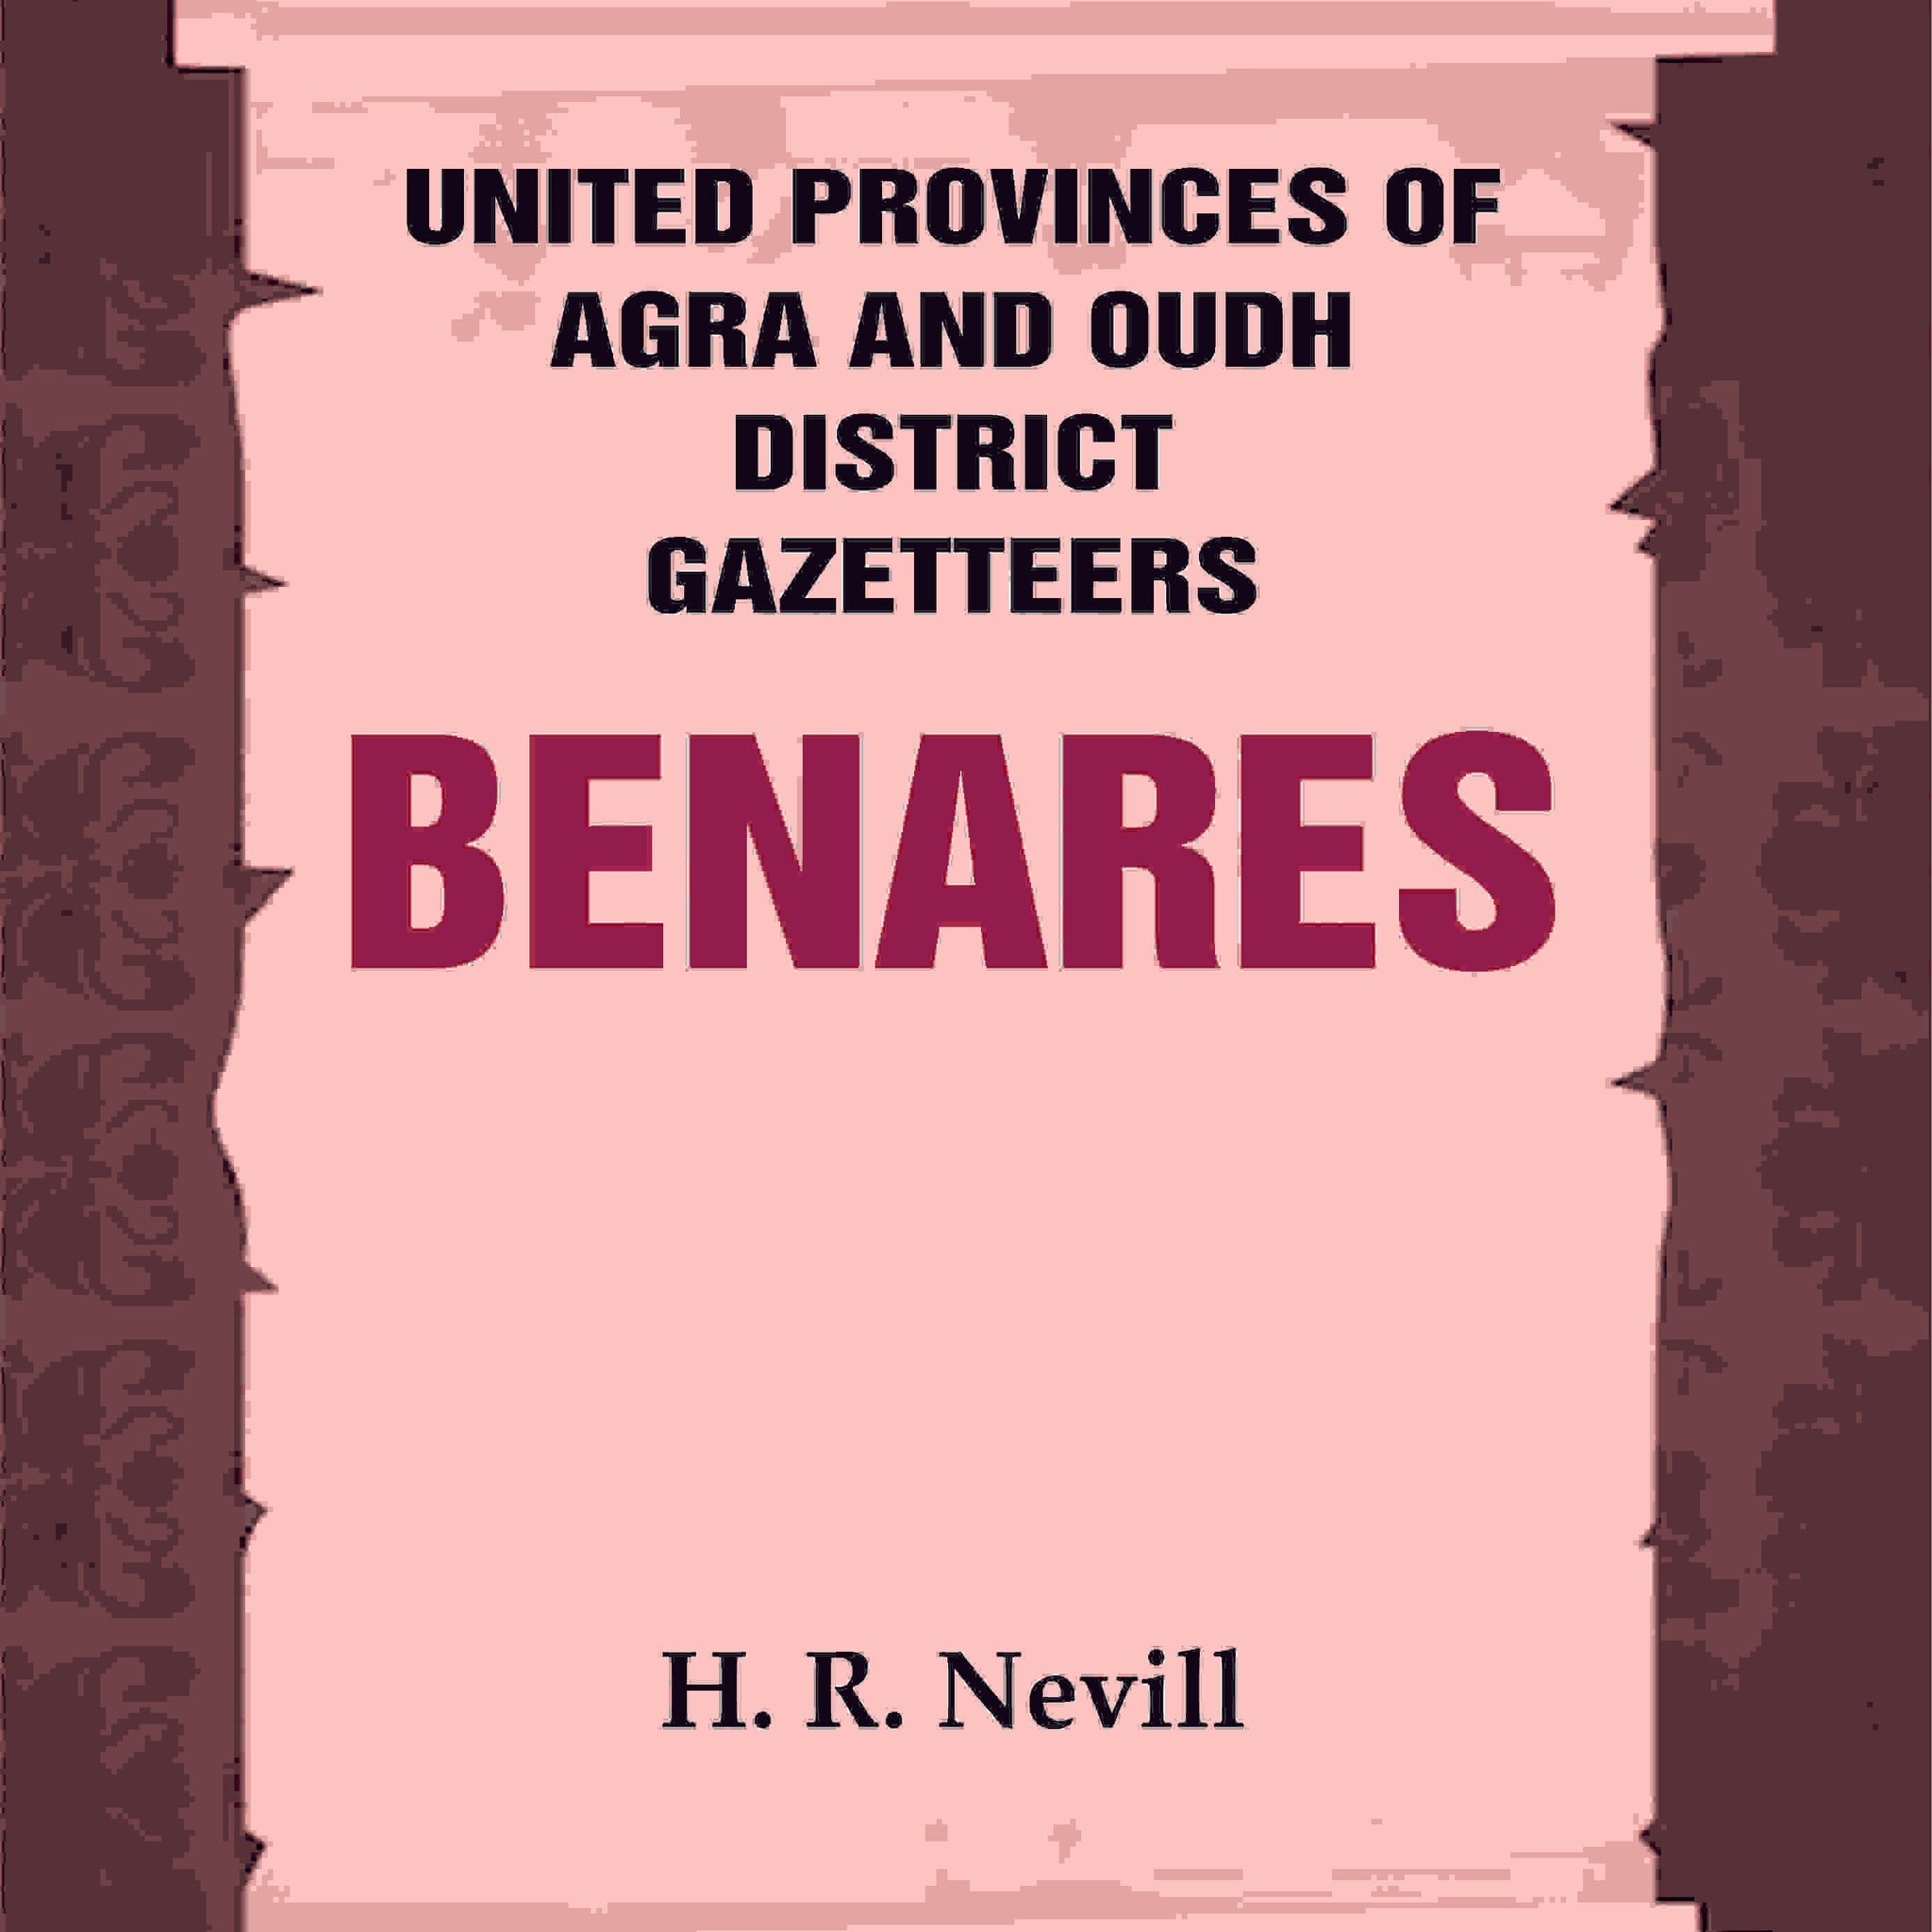 United Provinces of Agra and Oudh District Gazetteers: Benares